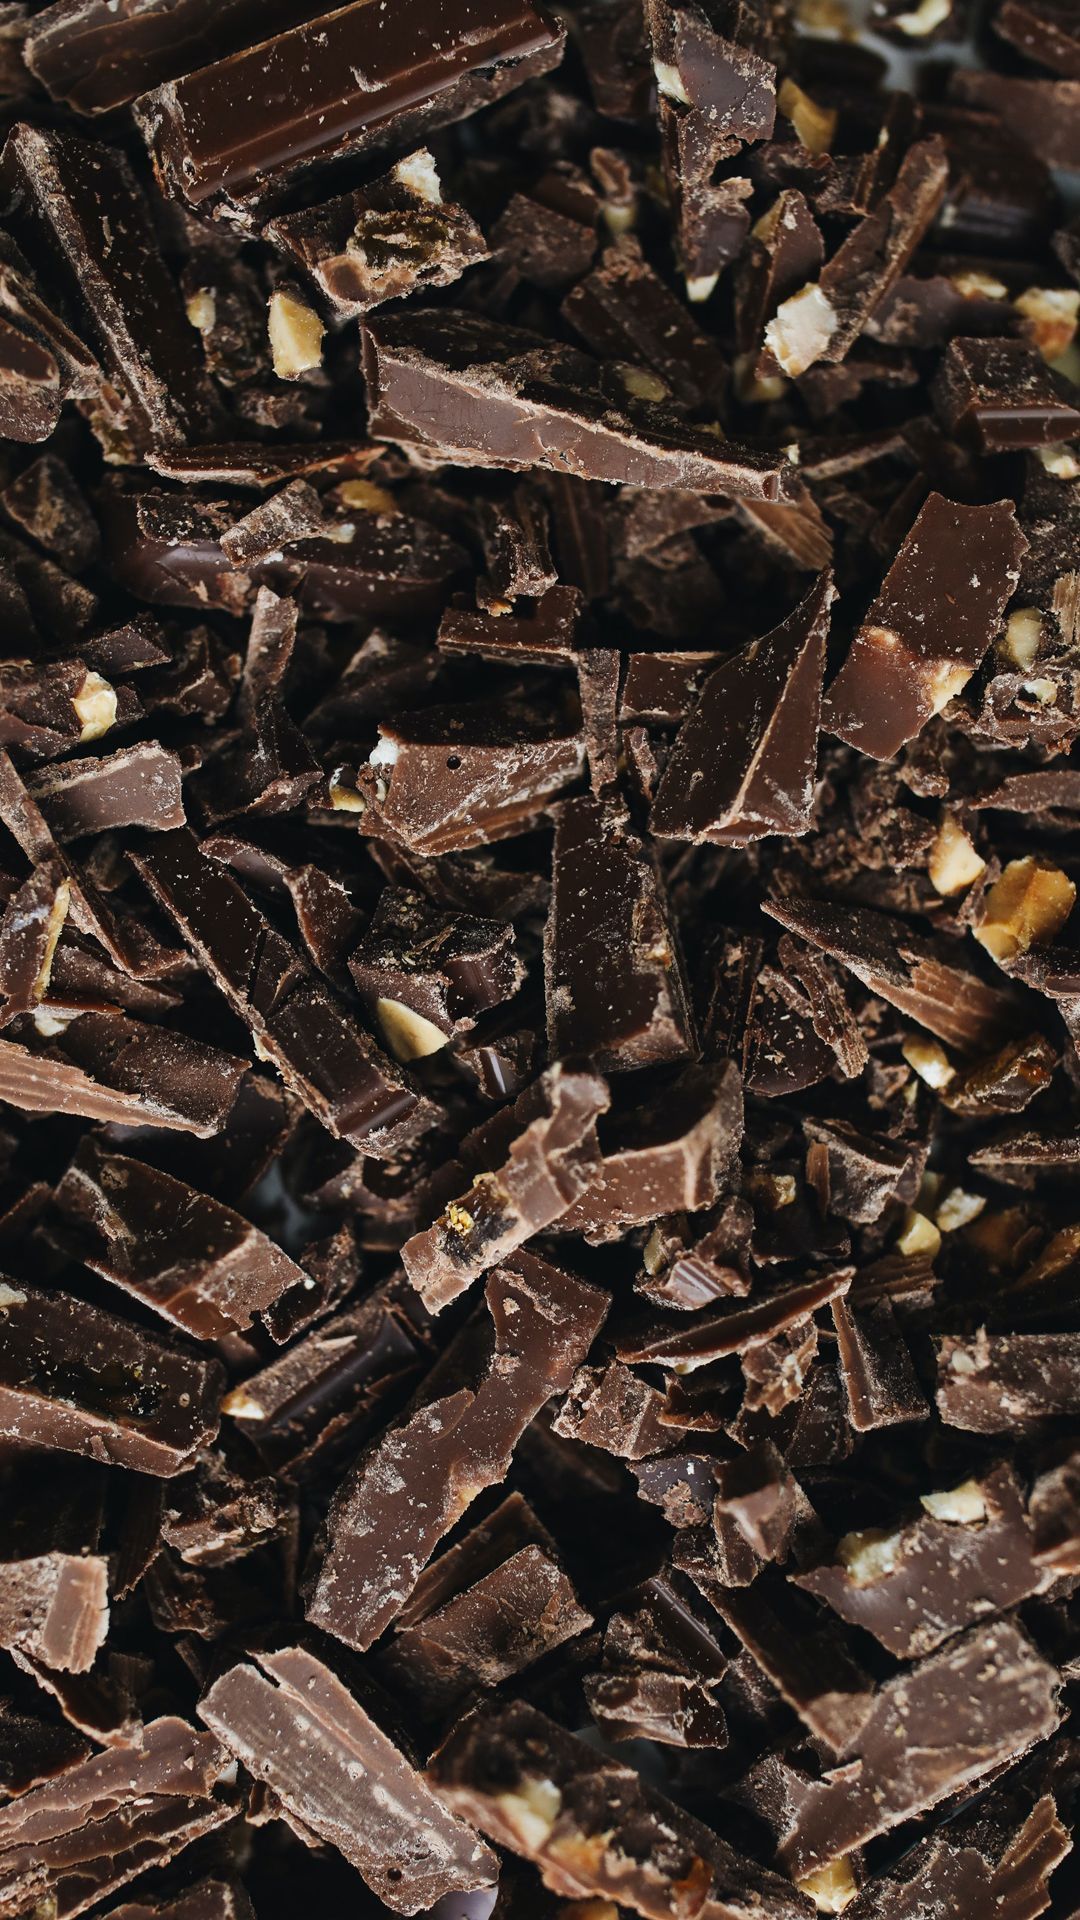 A close up of chocolate and nuts - Chocolate